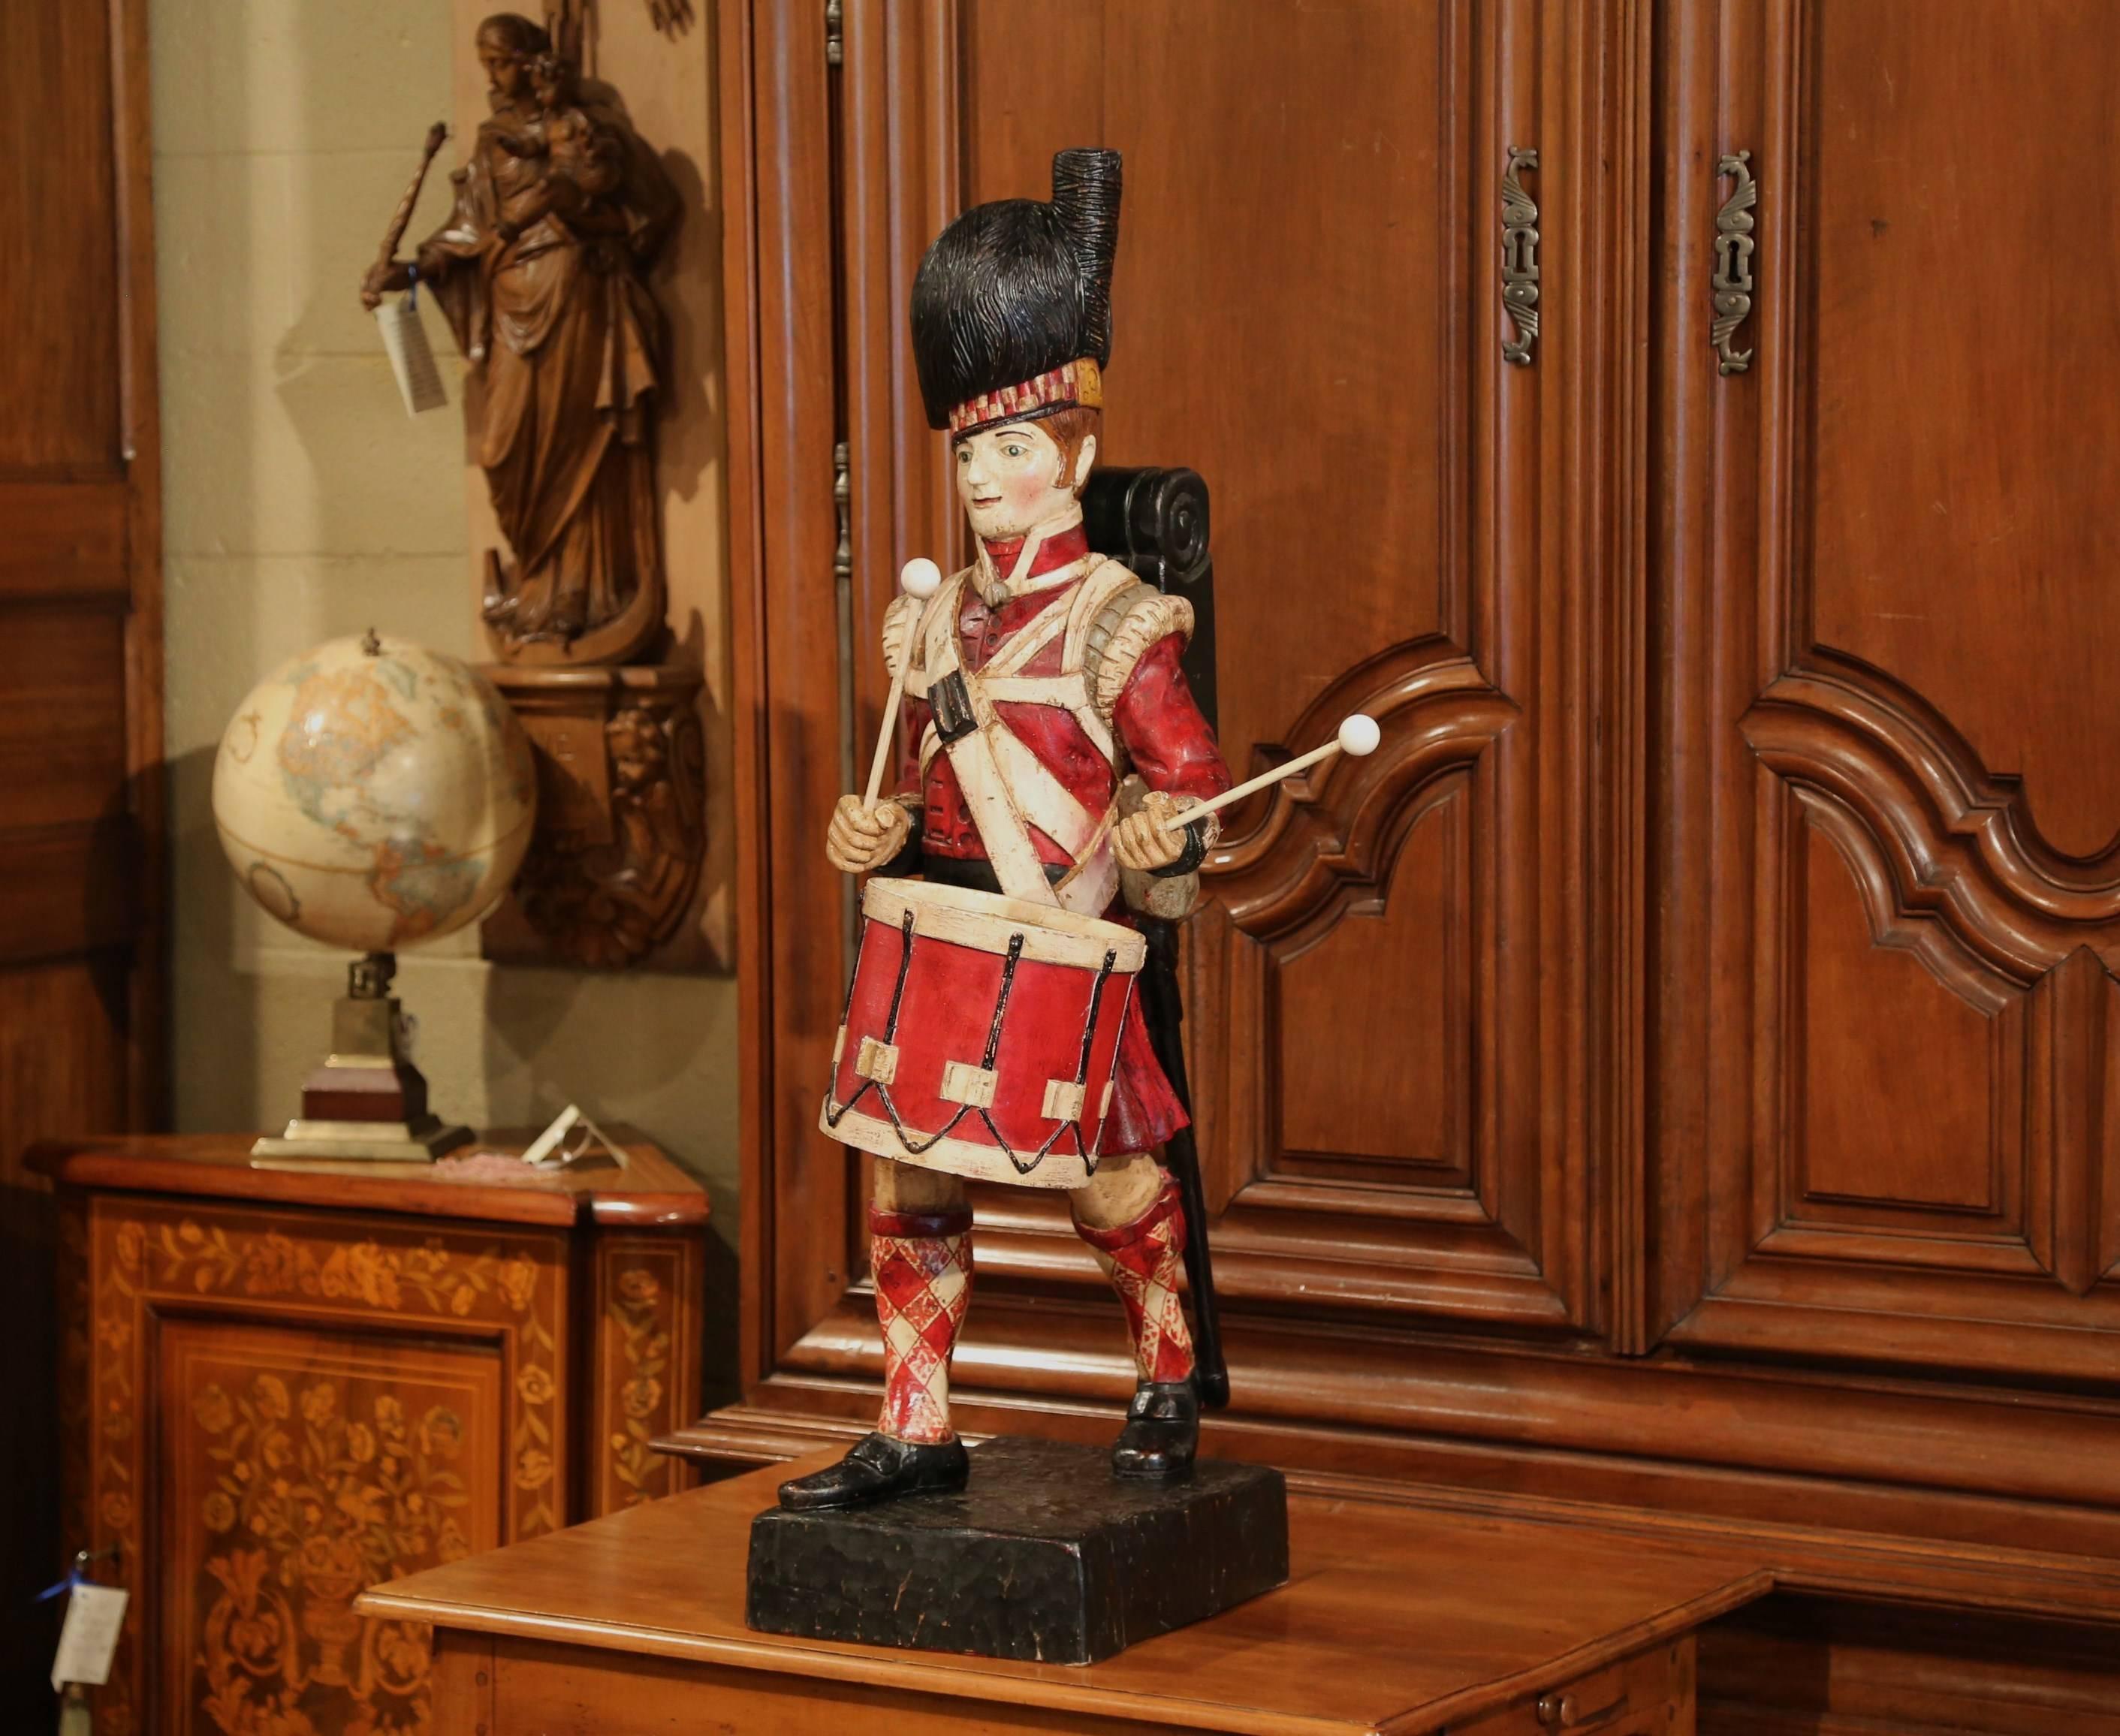 This beautiful, antique wood figure was crafted in Scotland, circa 1890. The large carving features a traditional Scottish military drummer with carved hat, backpack, sword, drum and drumsticks. Standing on a square base, he is wearing a red coat